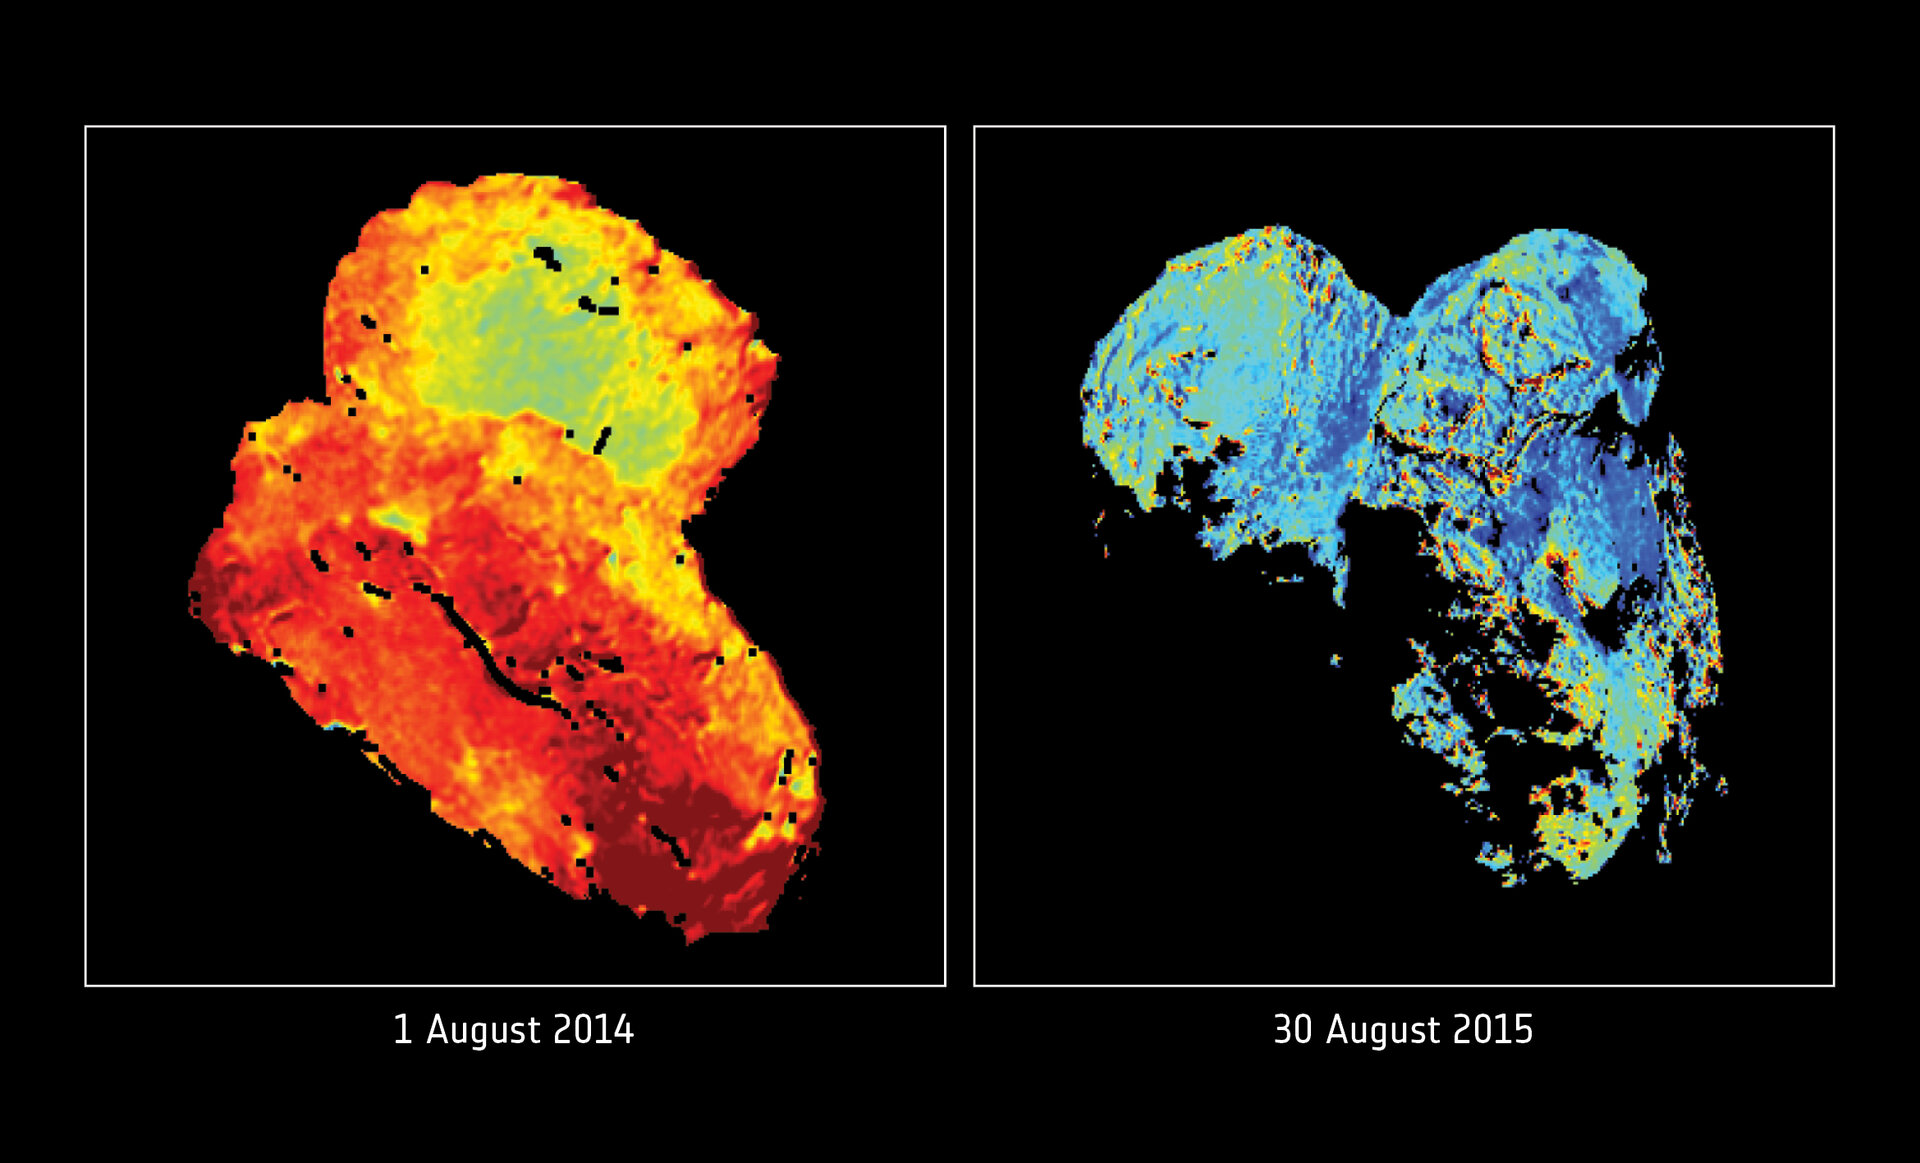 Seasonal cycle of water ice at the comet